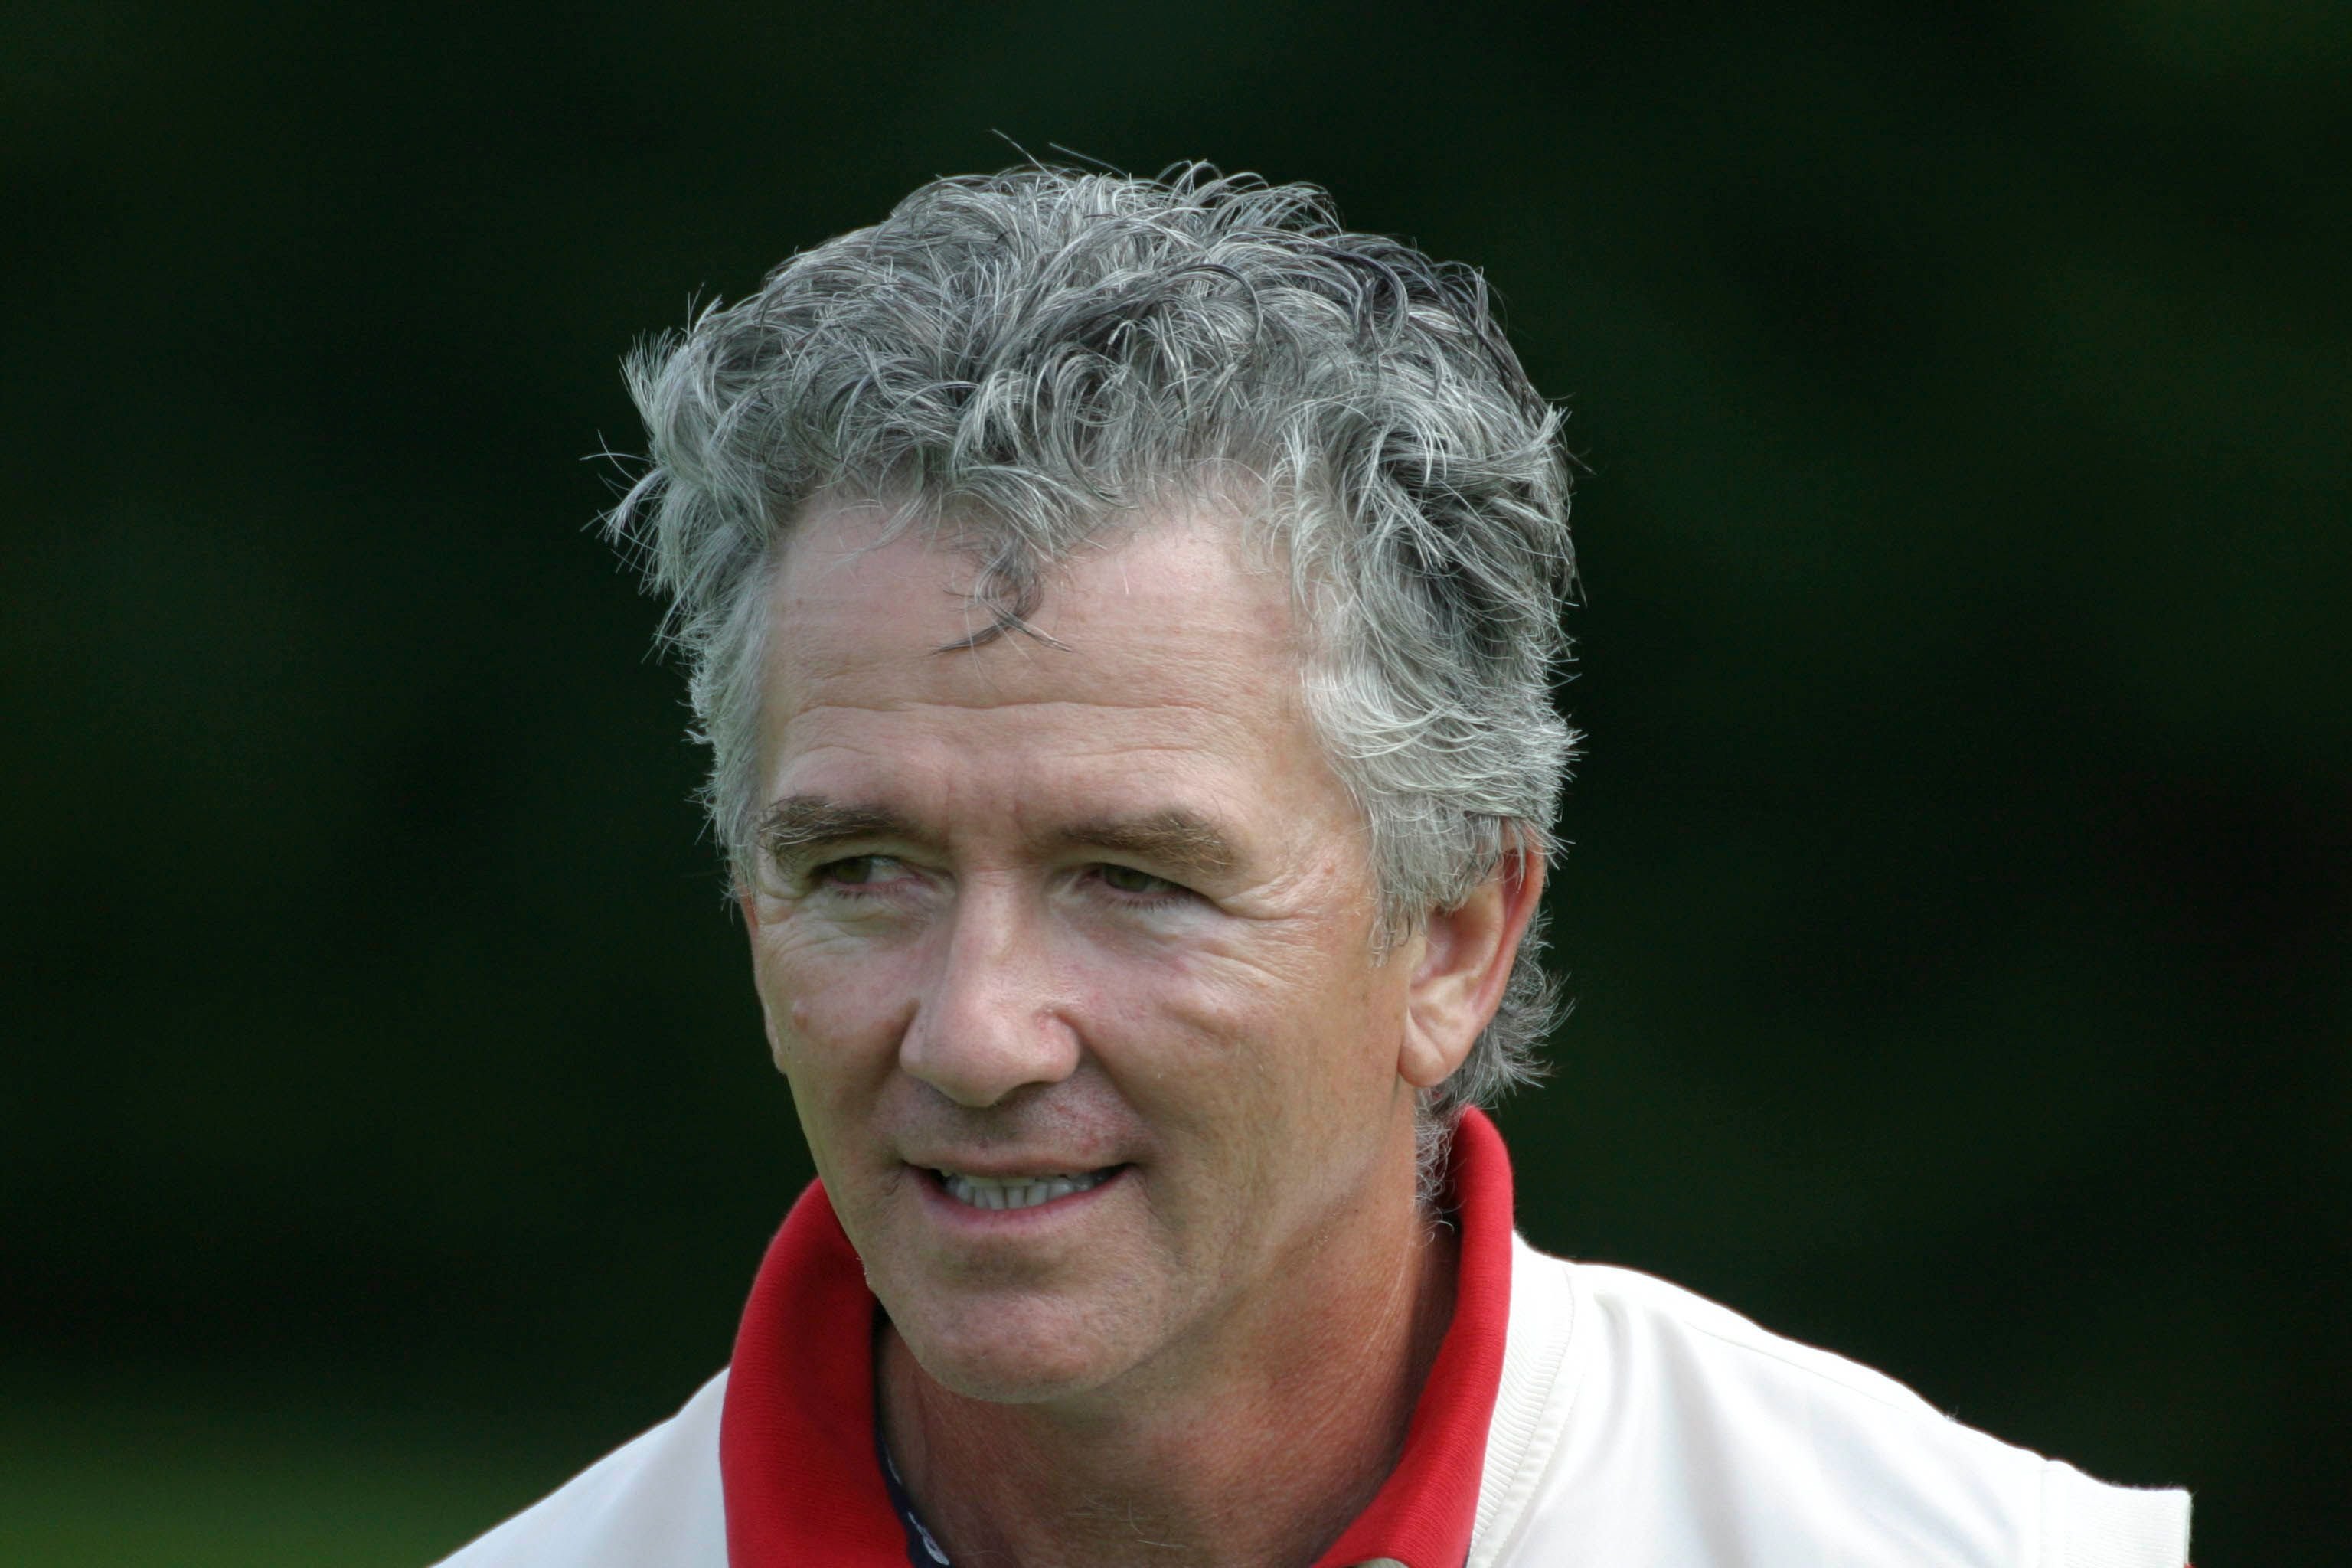 Patrick Duffy attending the Northen Rock All Star Cup at the Celtic Manor Hotel in South Wales on August, 26 2006.┃Source: Getty Images